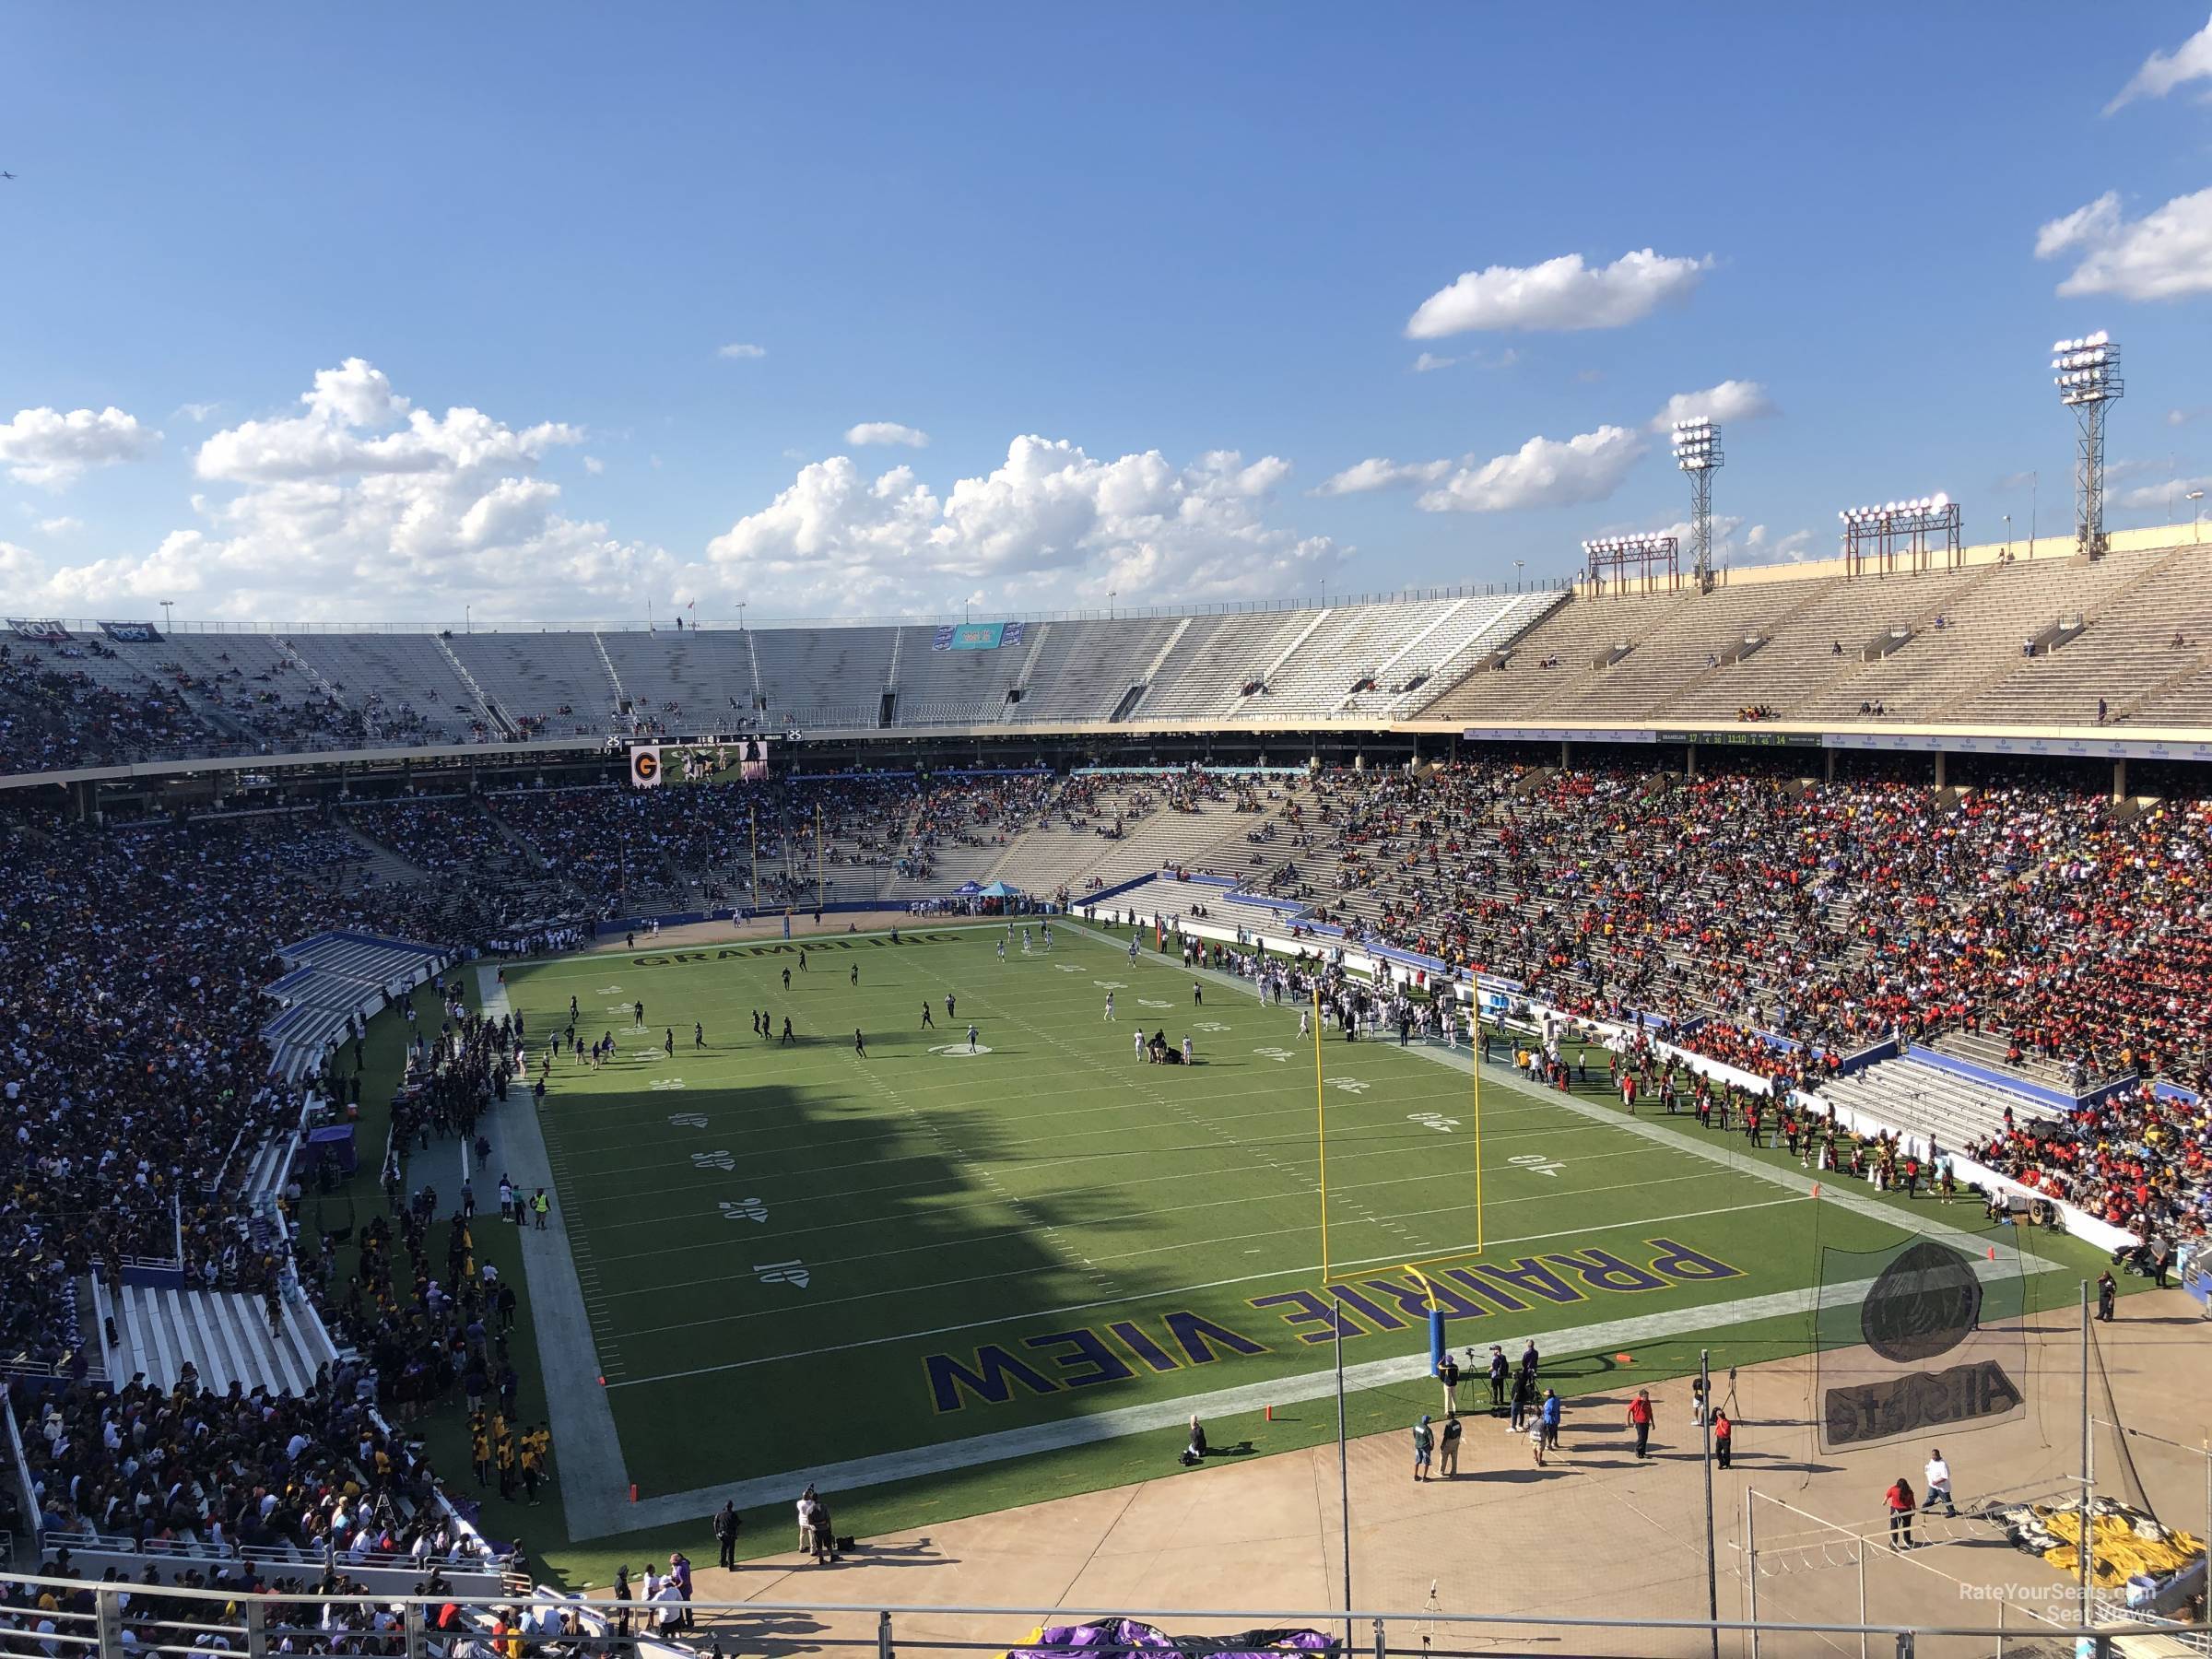 section 141, row 8 seat view  - cotton bowl